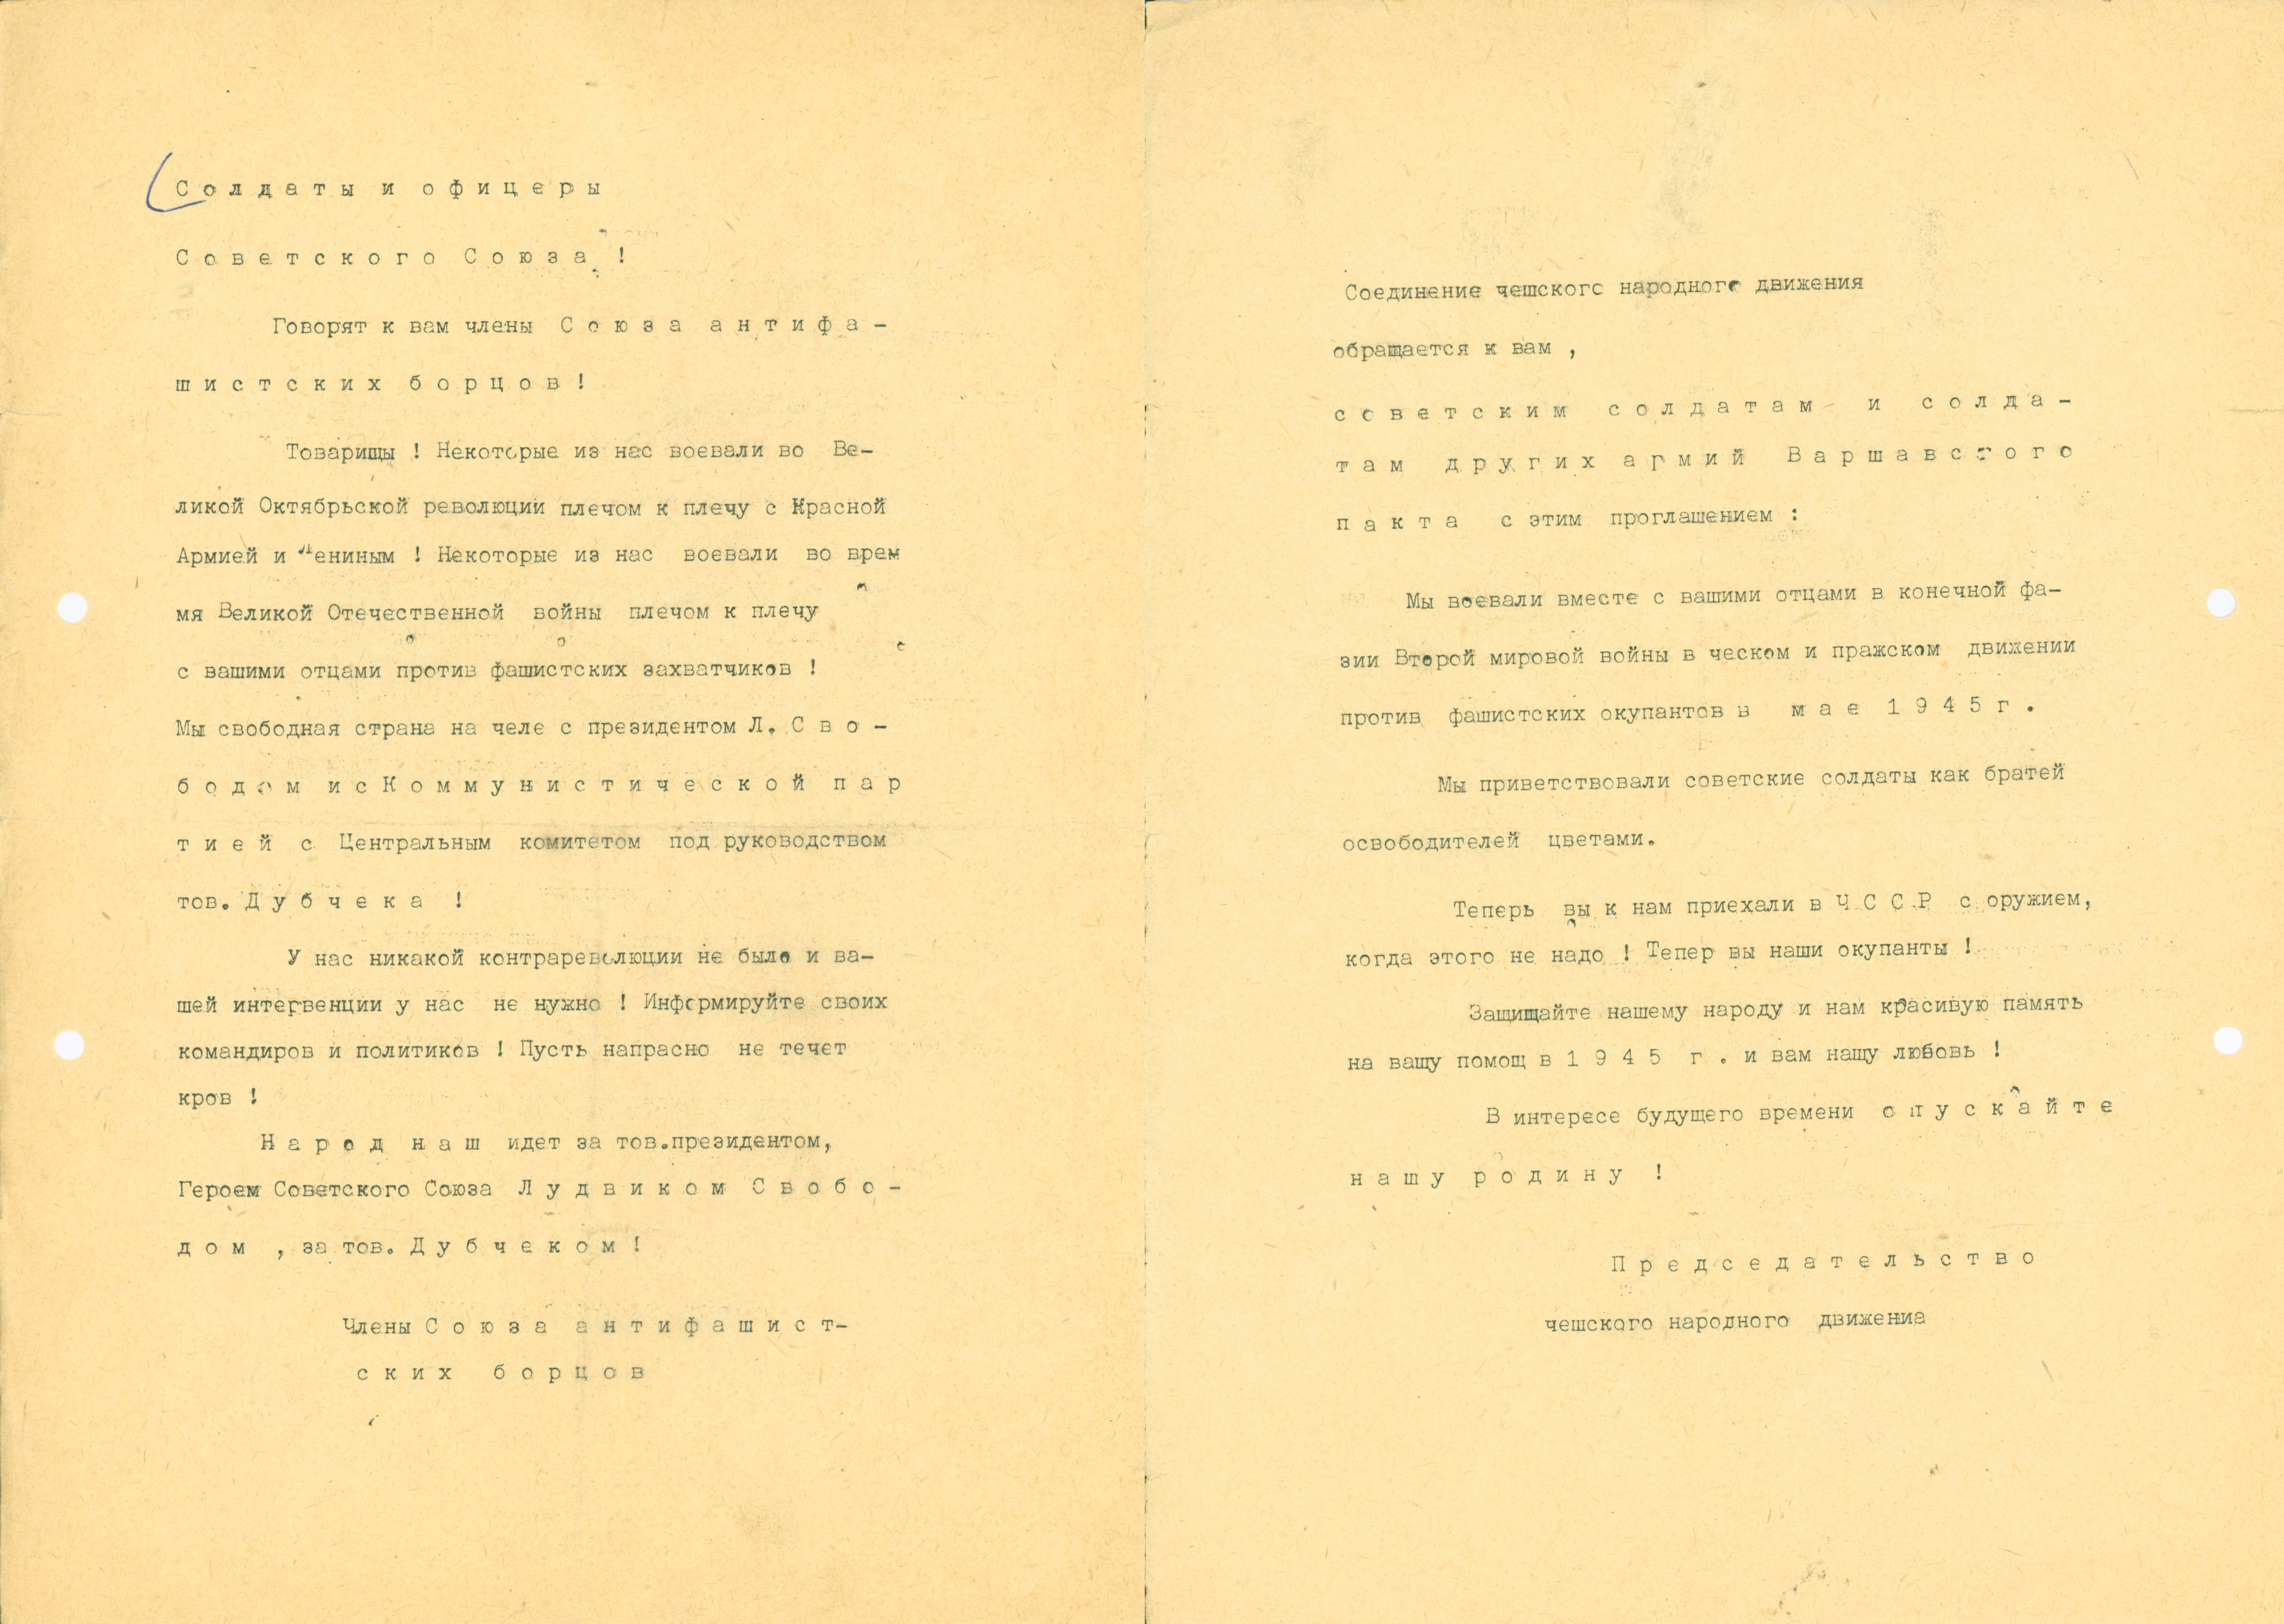 Appeal of the Federation of Anti-Fascist Fighters to the Soviet Army